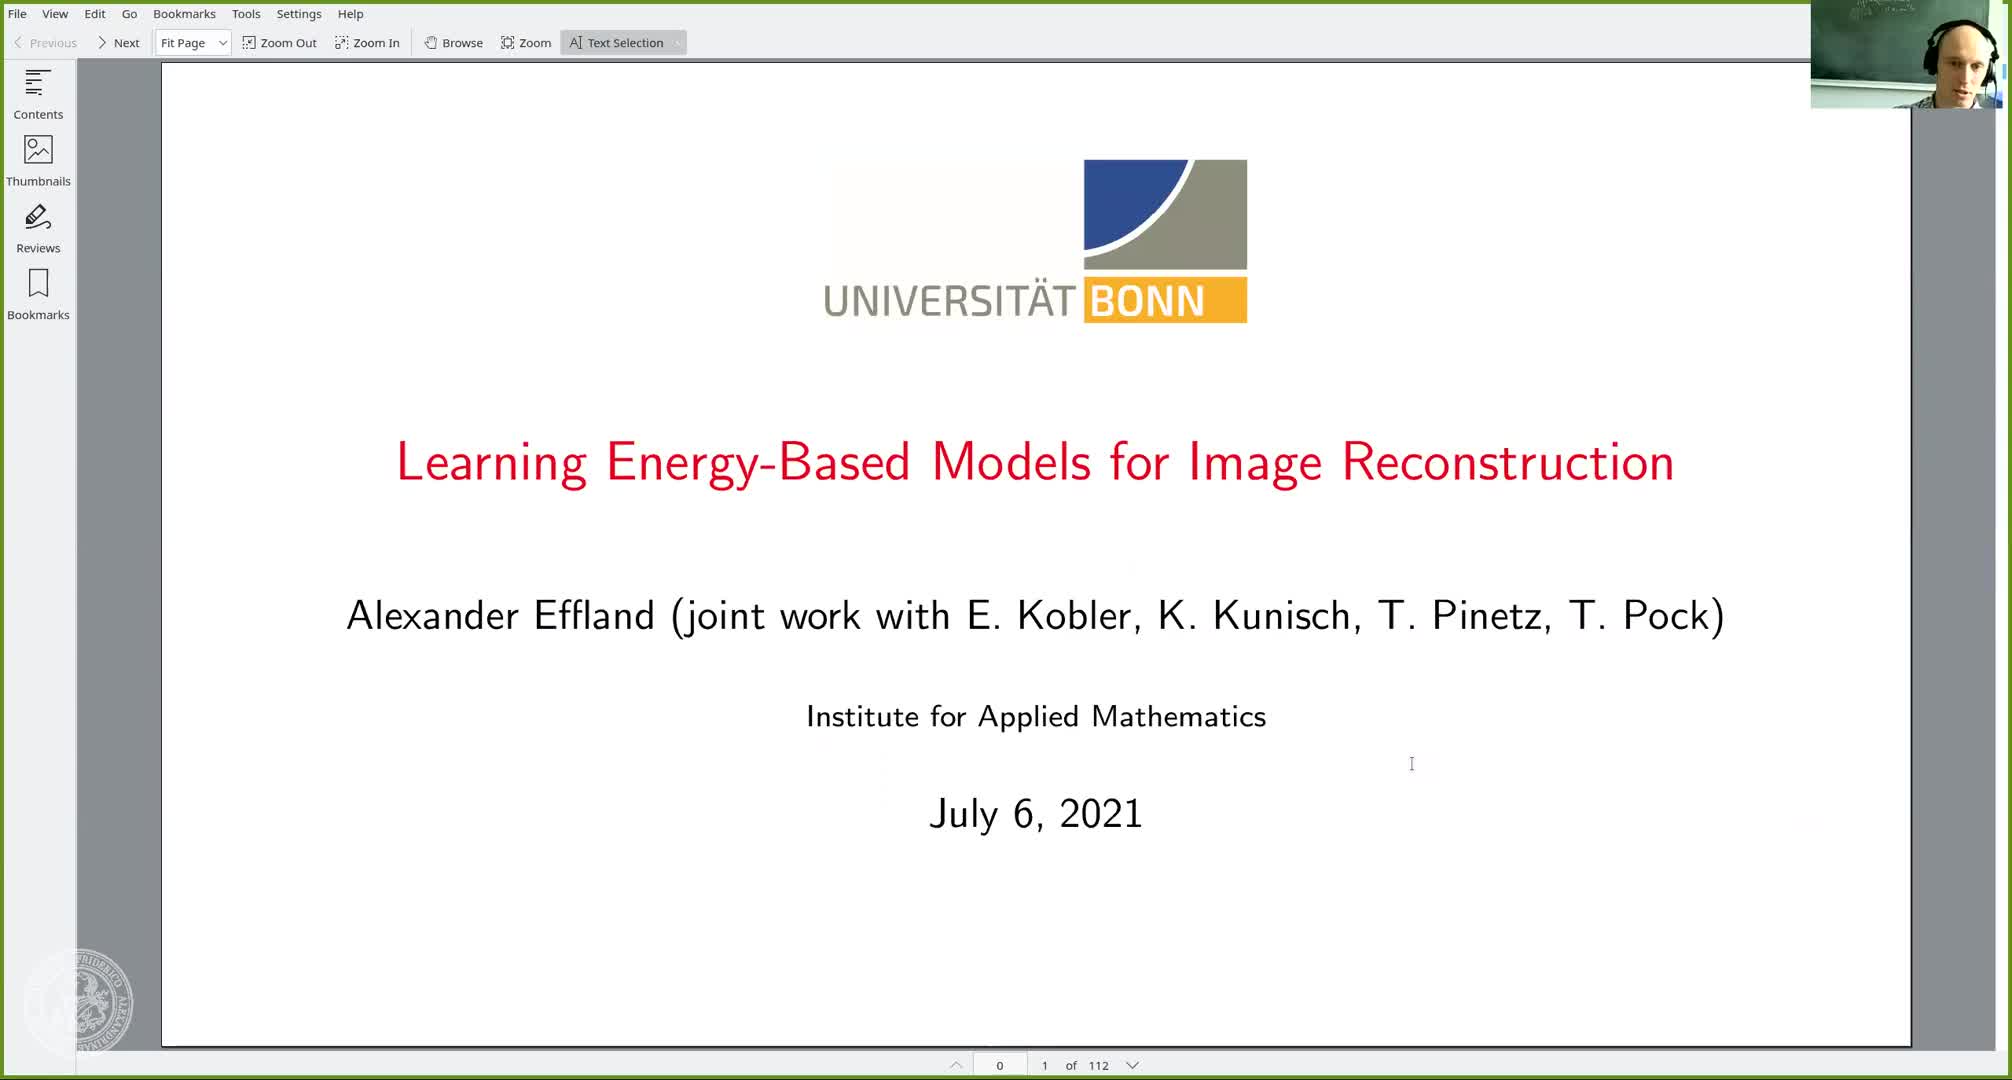 Learning Energy-Based Models for Image Reconstruction (A. Effland, University of Bonn, Germany) preview image